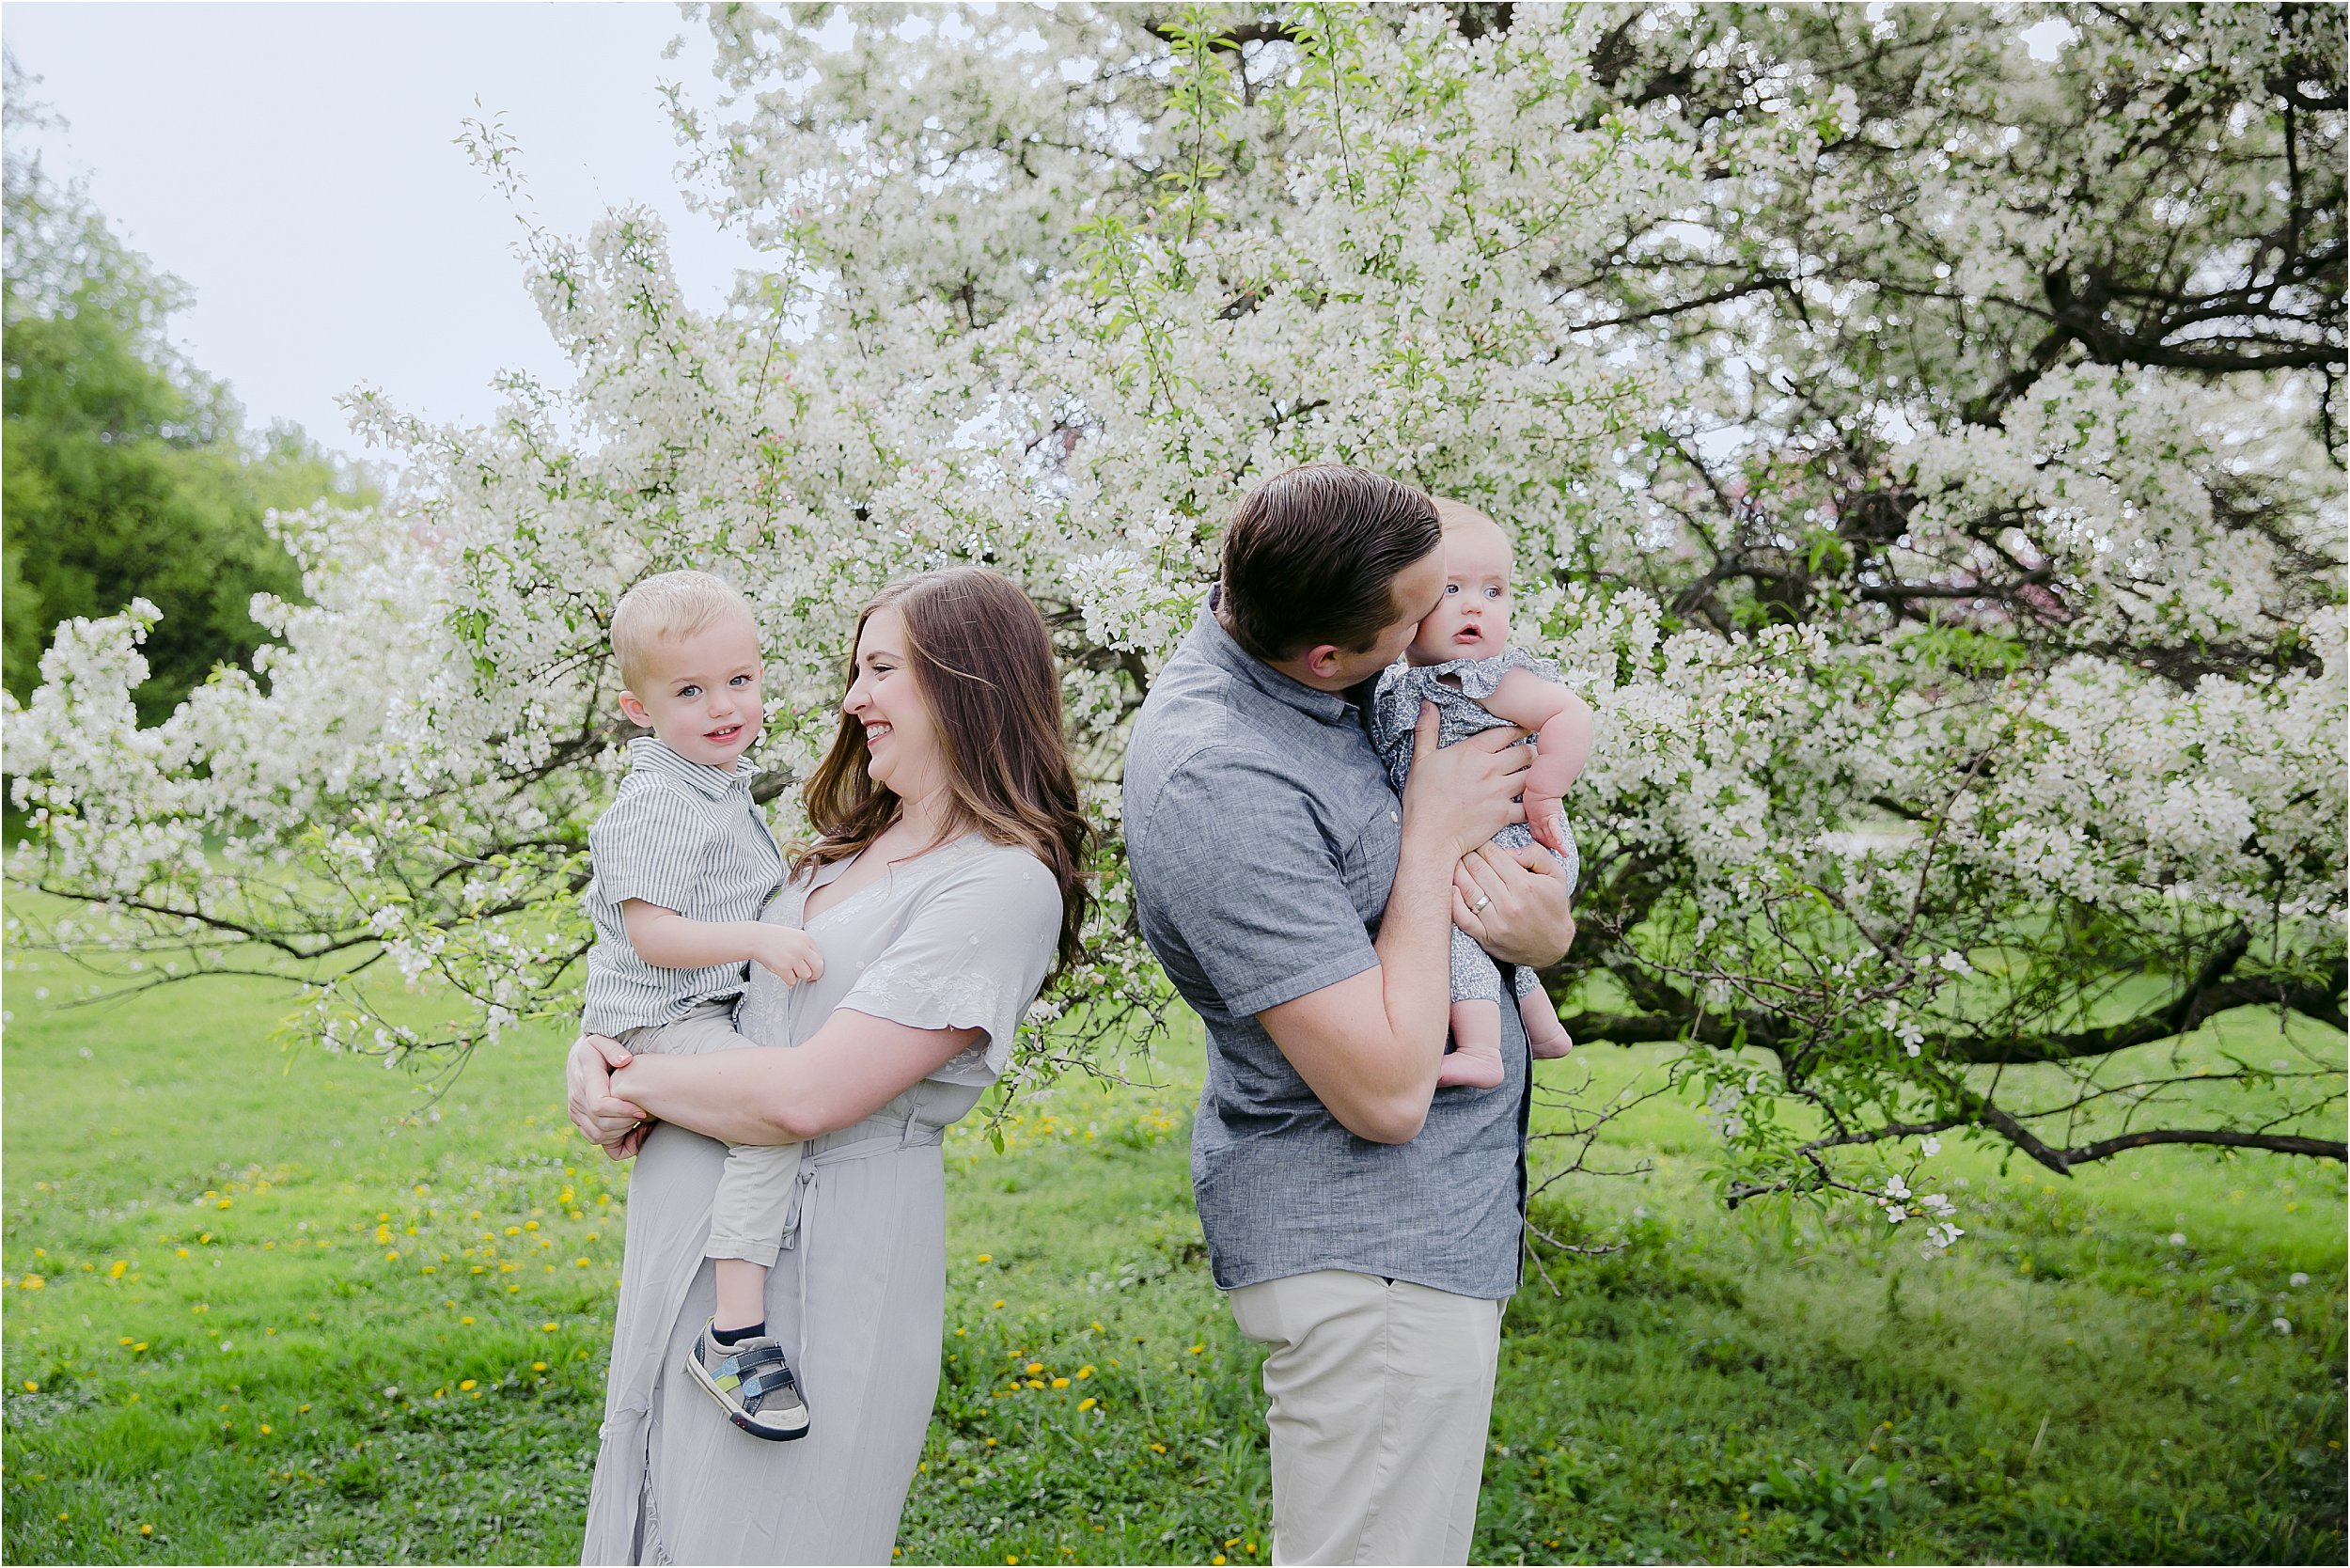 02-mom-dad-two-small-children-flowering-spring-trees.JPG